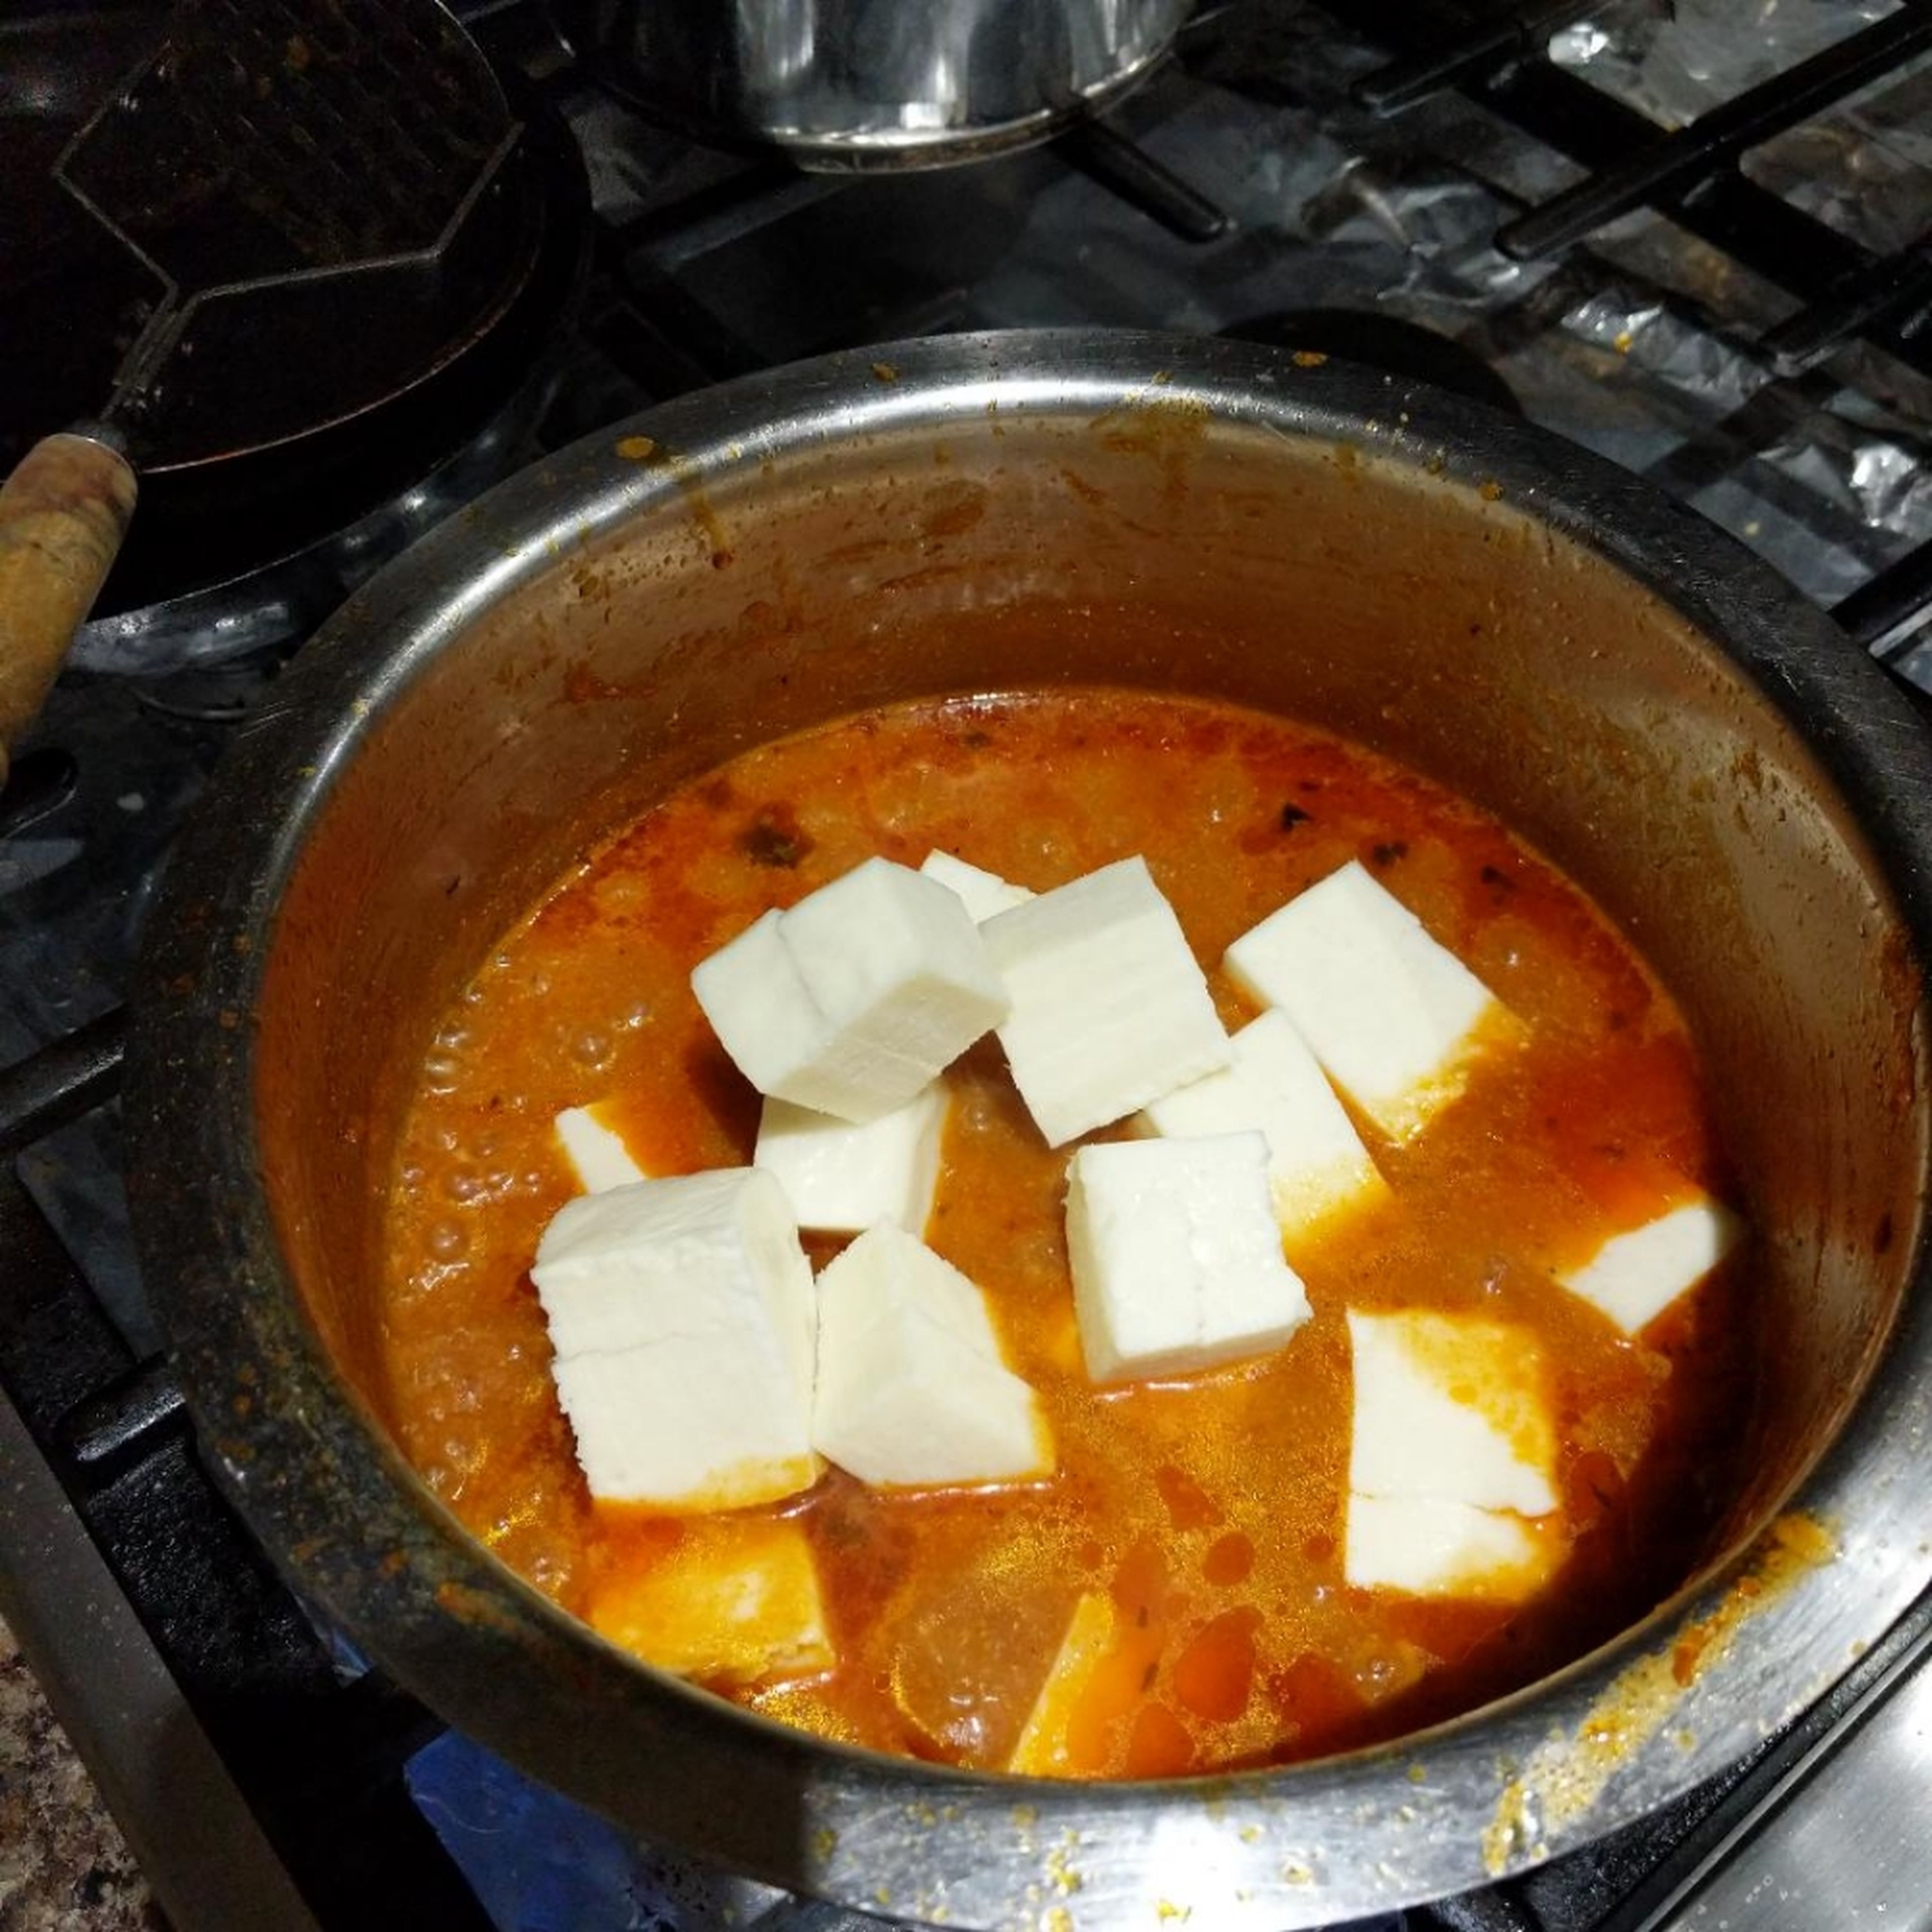 Cut paneer block into cubes and add to curry. Then cover and cook on low/simmer for 10min